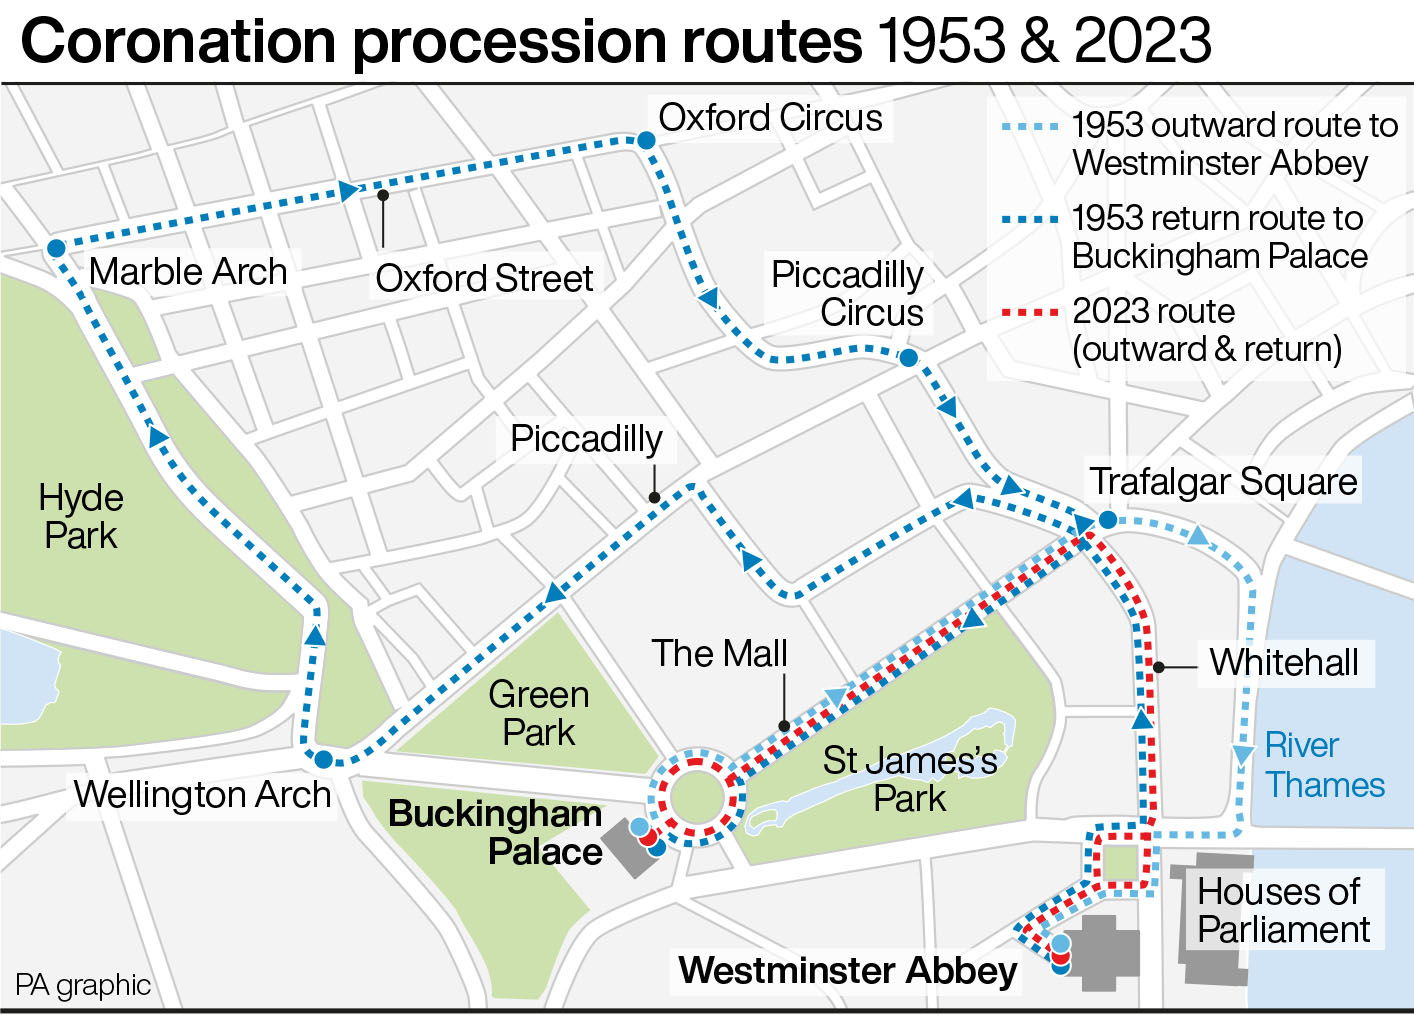 The coronation routes in 1953 and 2023